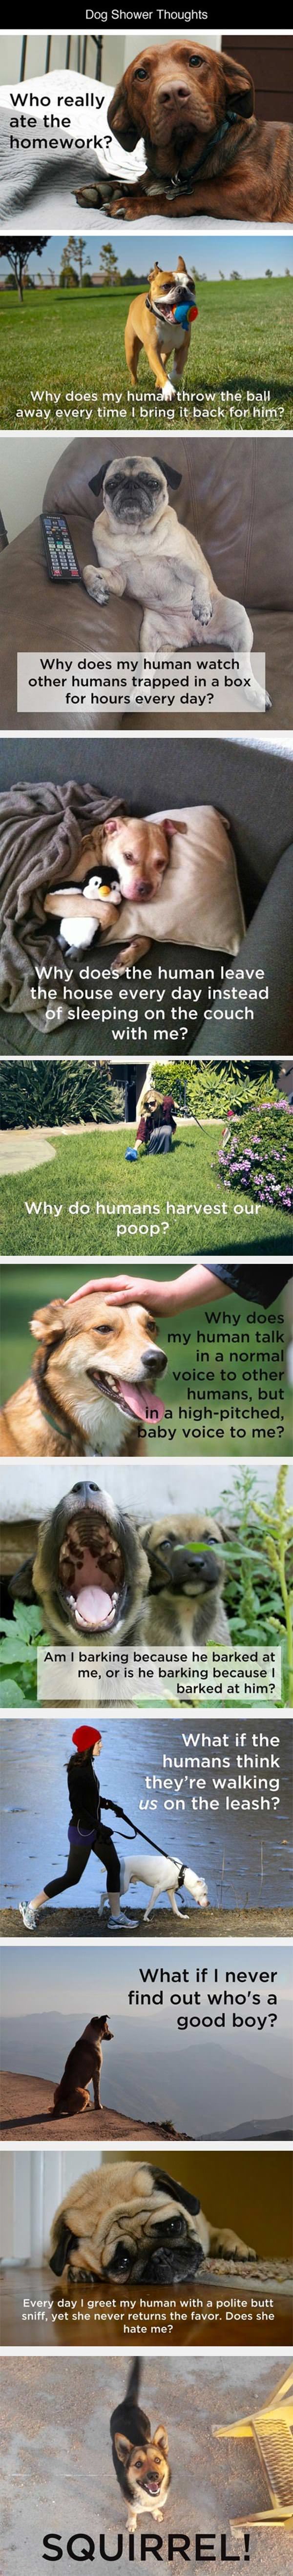 dog thoughts funny picture